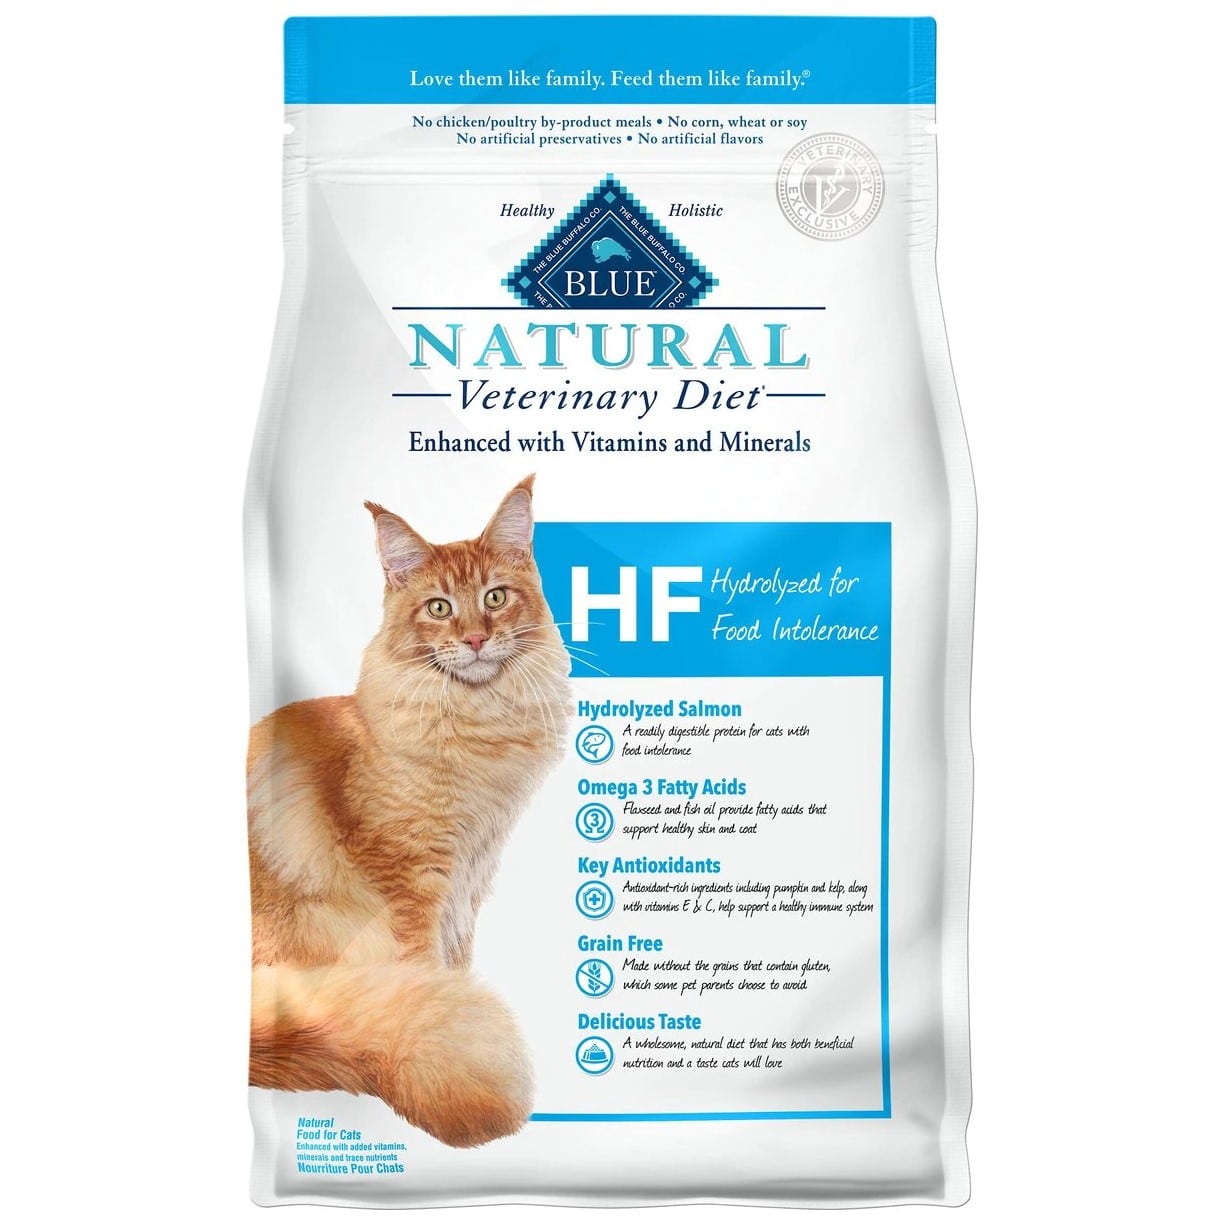 Blue Buffalo Natural Veterinary Diet HF Hydrolyzed for Food Intolerance Grain-Free Dry Cat Food